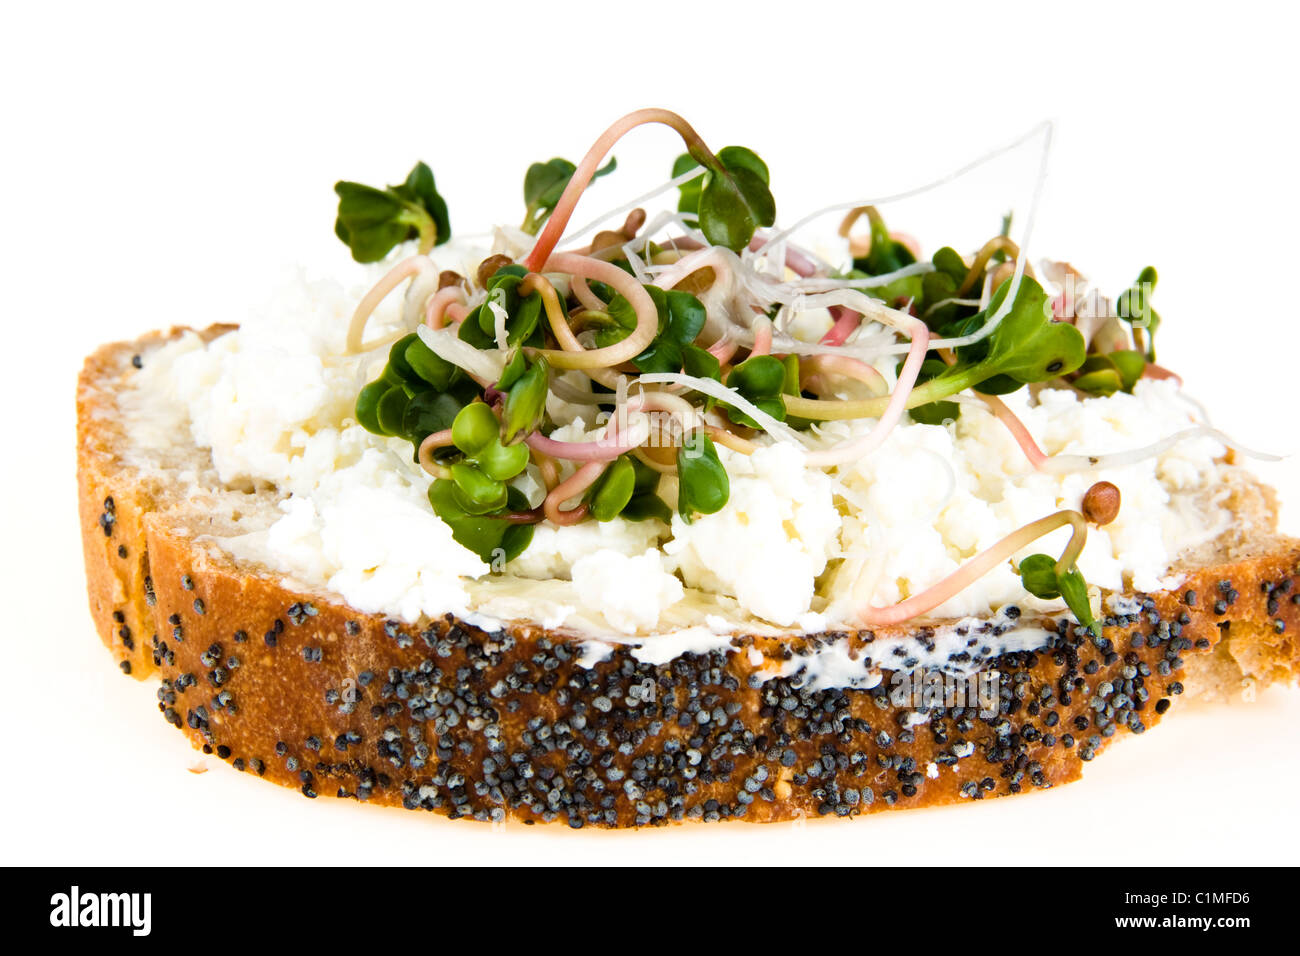 A slice of bread with poppy seeds, with cottage cheese and radish sprouts Stock Photo